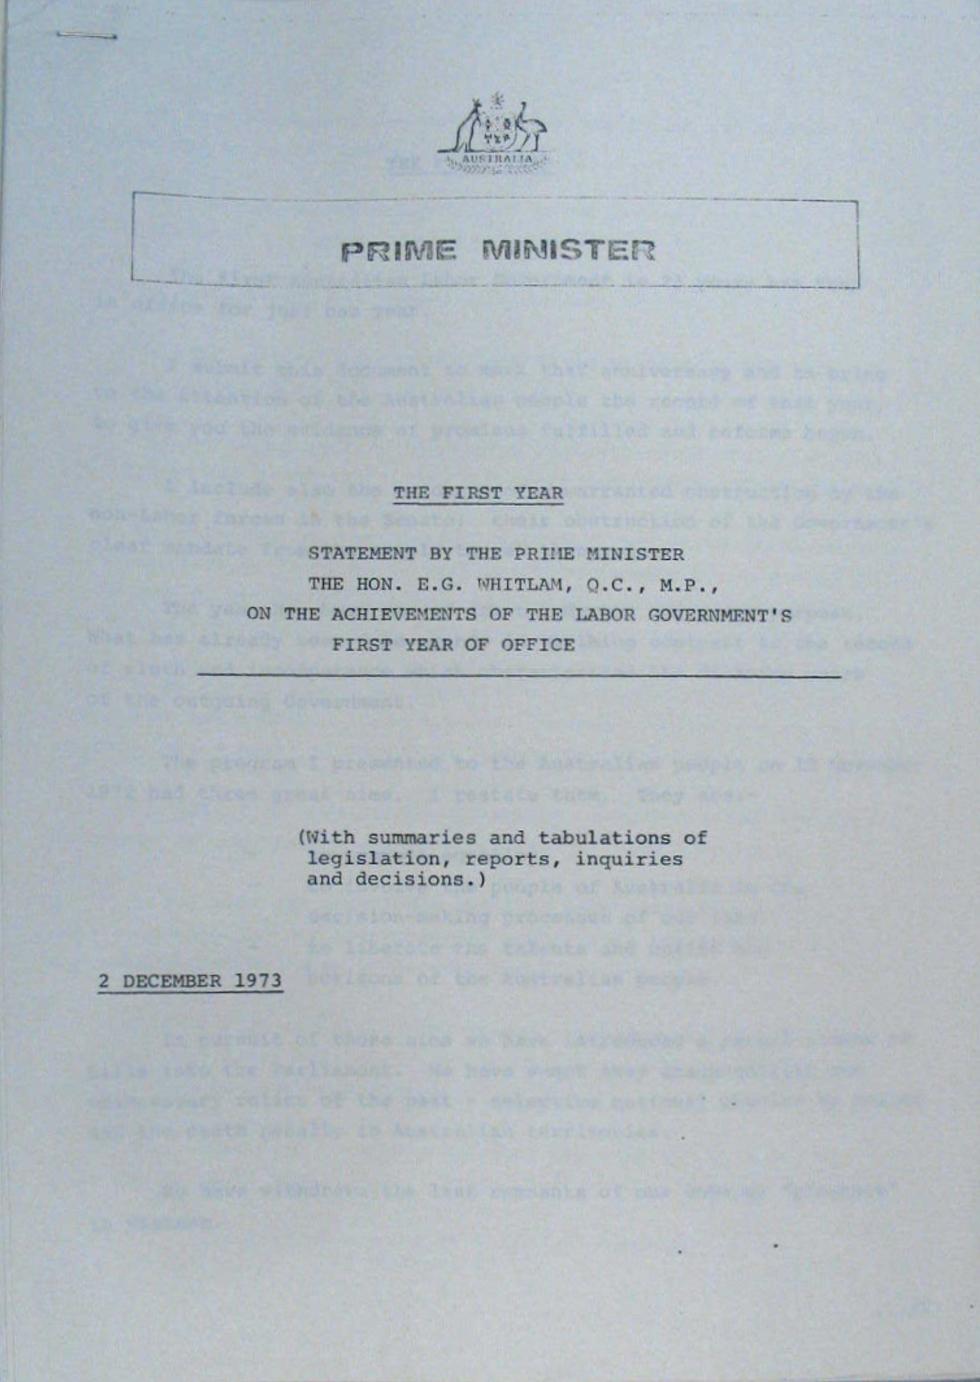 This is an electronic document with the Australian coat of arms at the top of the first page. The framed heading ‘Prime Minister’ sits below the coat of arms. The words ‘The First Year’ are underlined, followed by the words ‘Statement by the Prime Minister the Hon. E.G. Whitlam, Q.C., M.P., on the achievements of the Labor Government’s first year of office’.